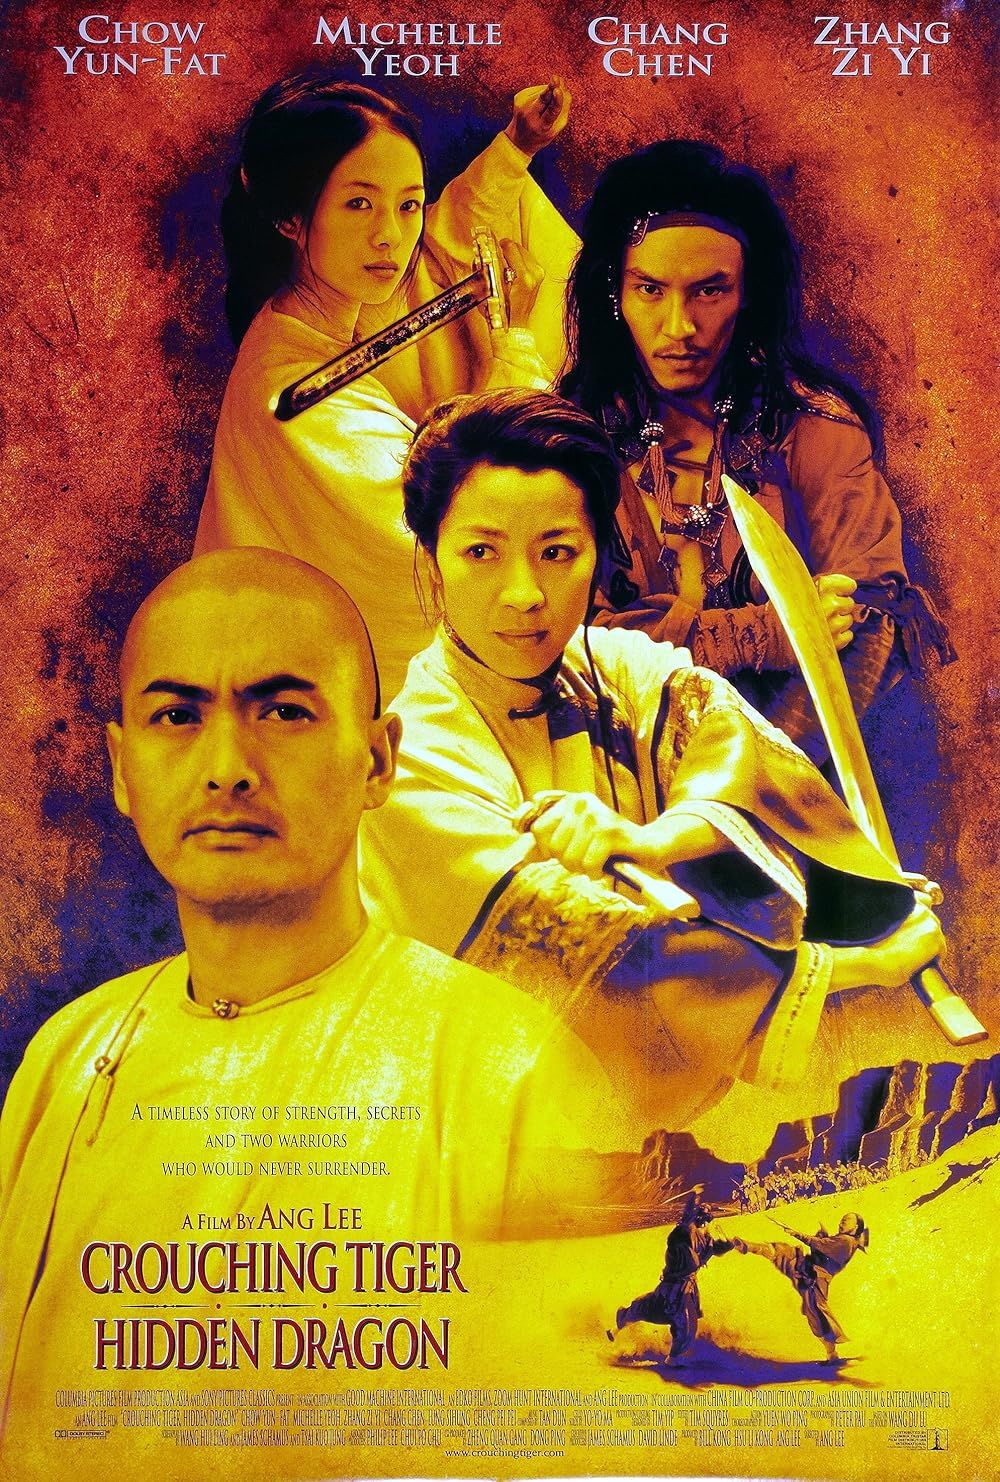 The Cast on the Crouching Tiger, Hidden Dragon Cover